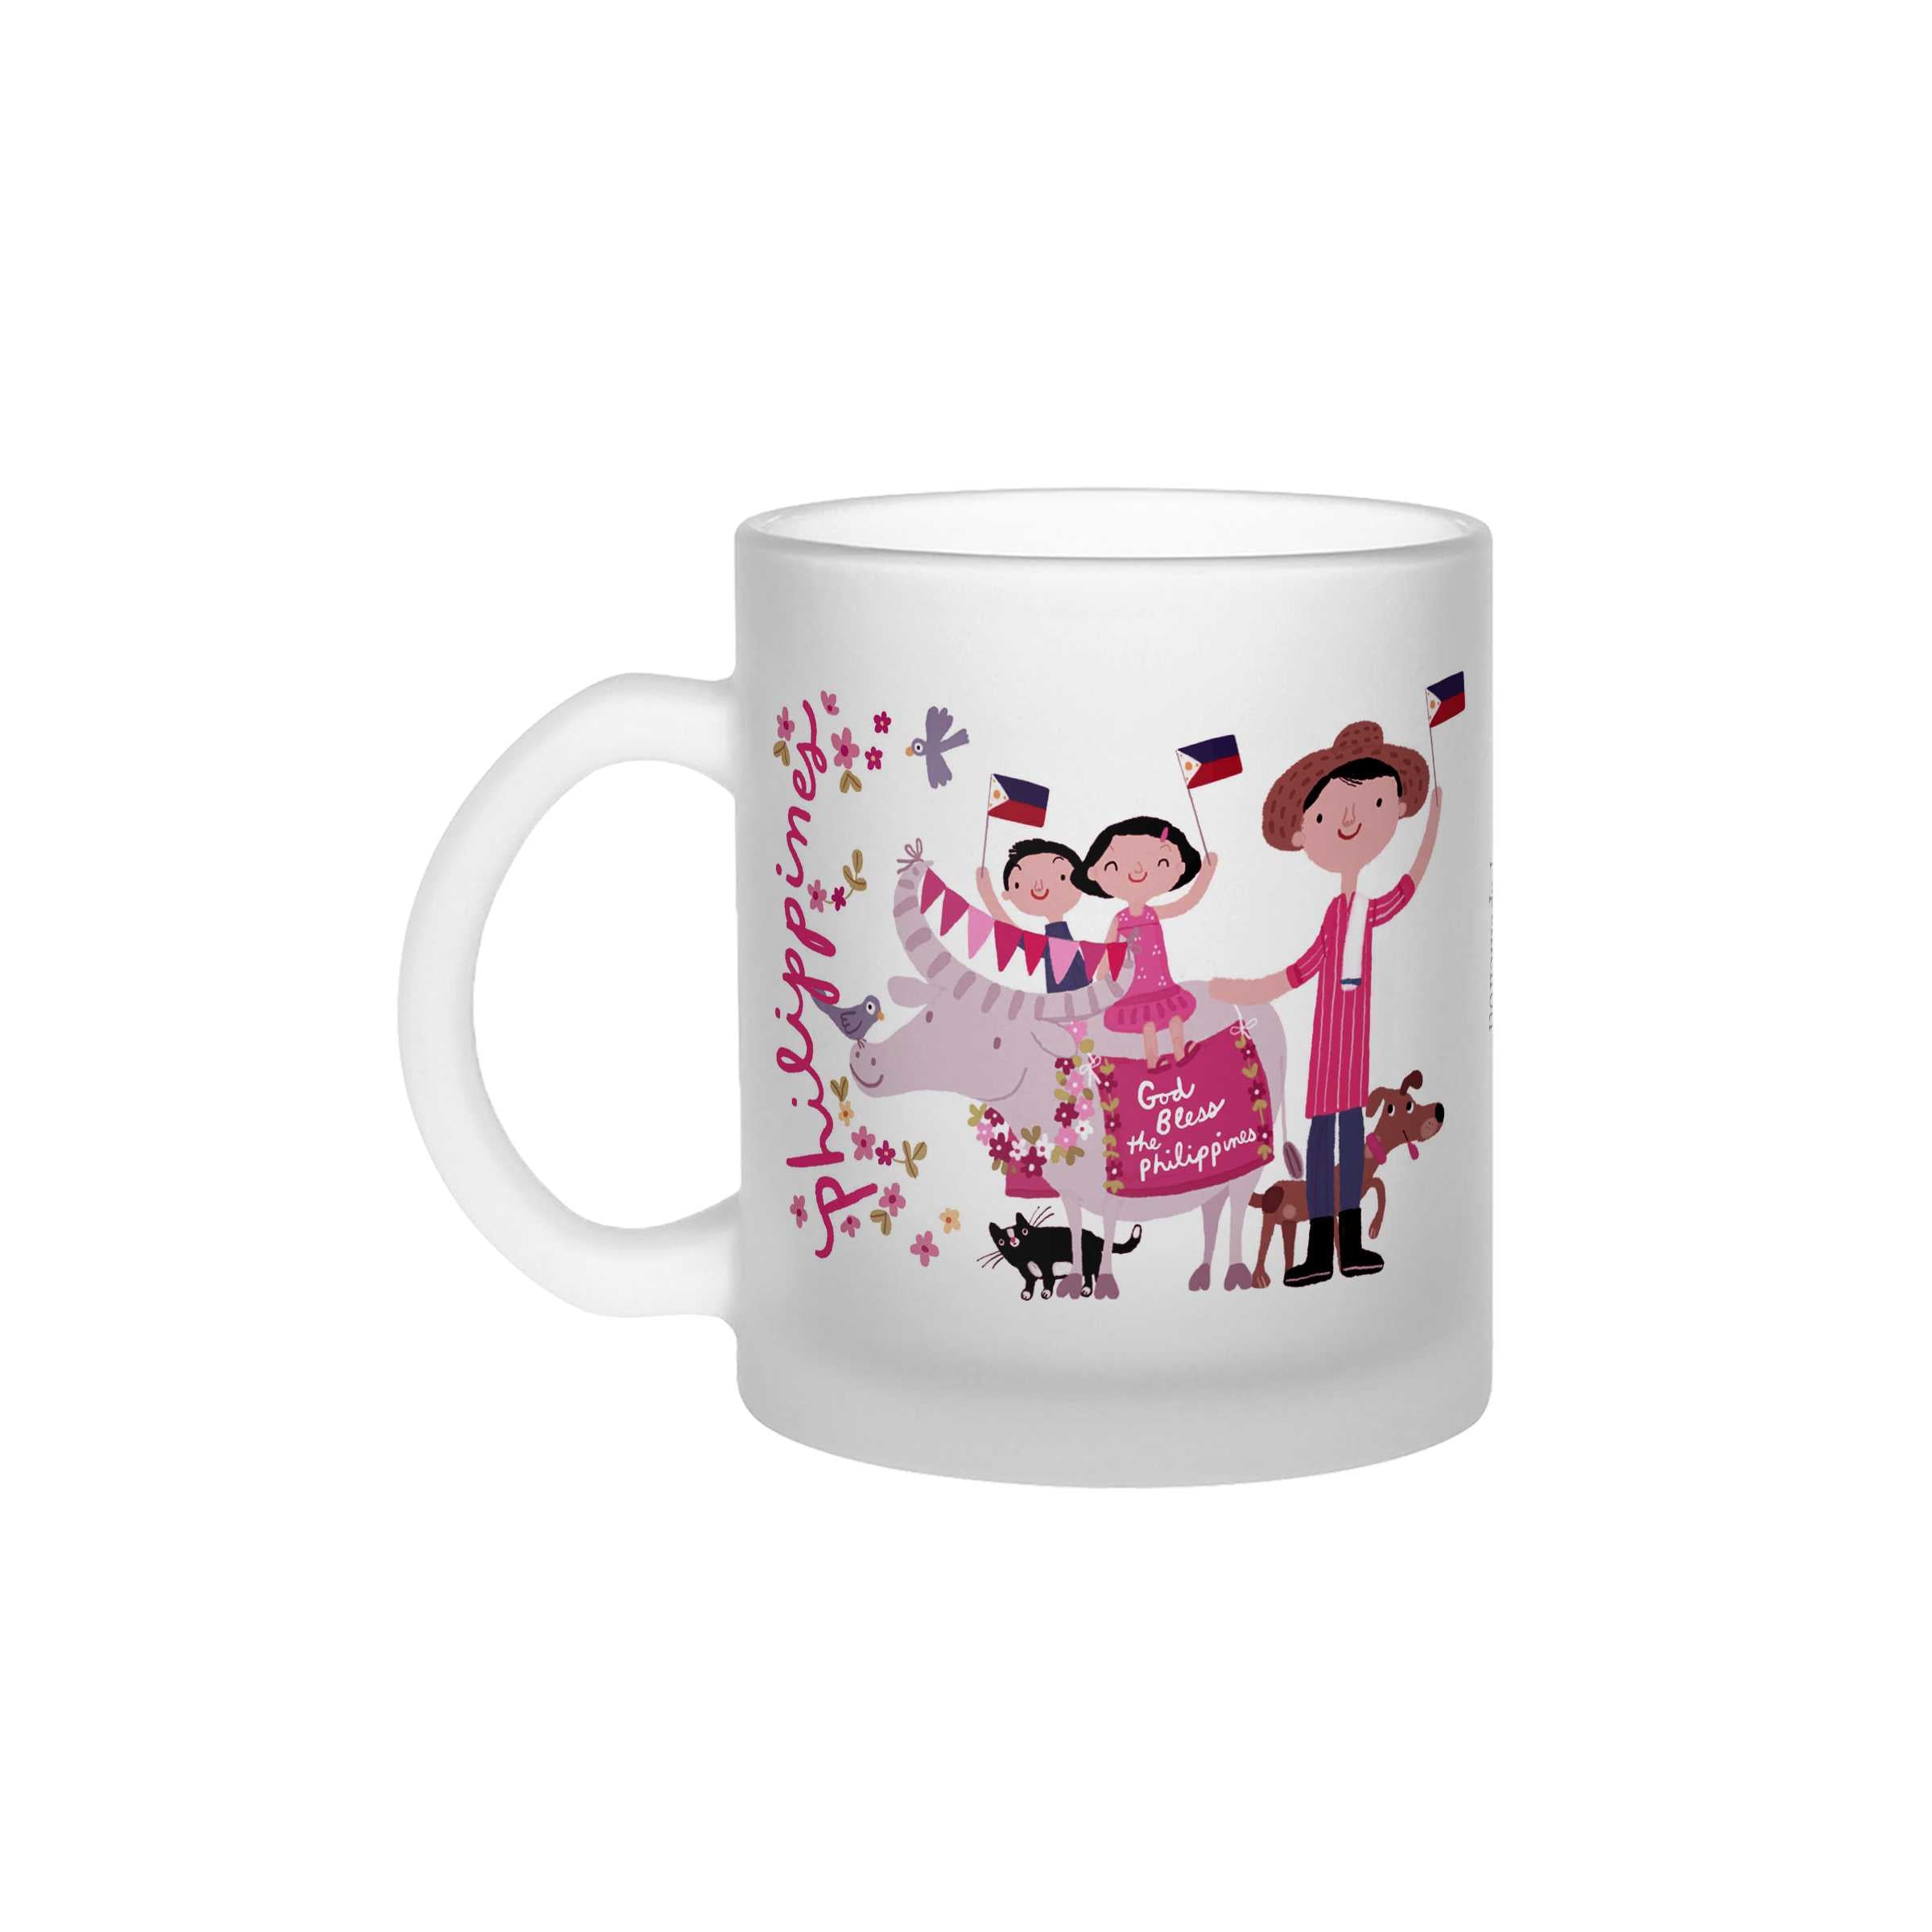 Philippine Collection Frosted Mug